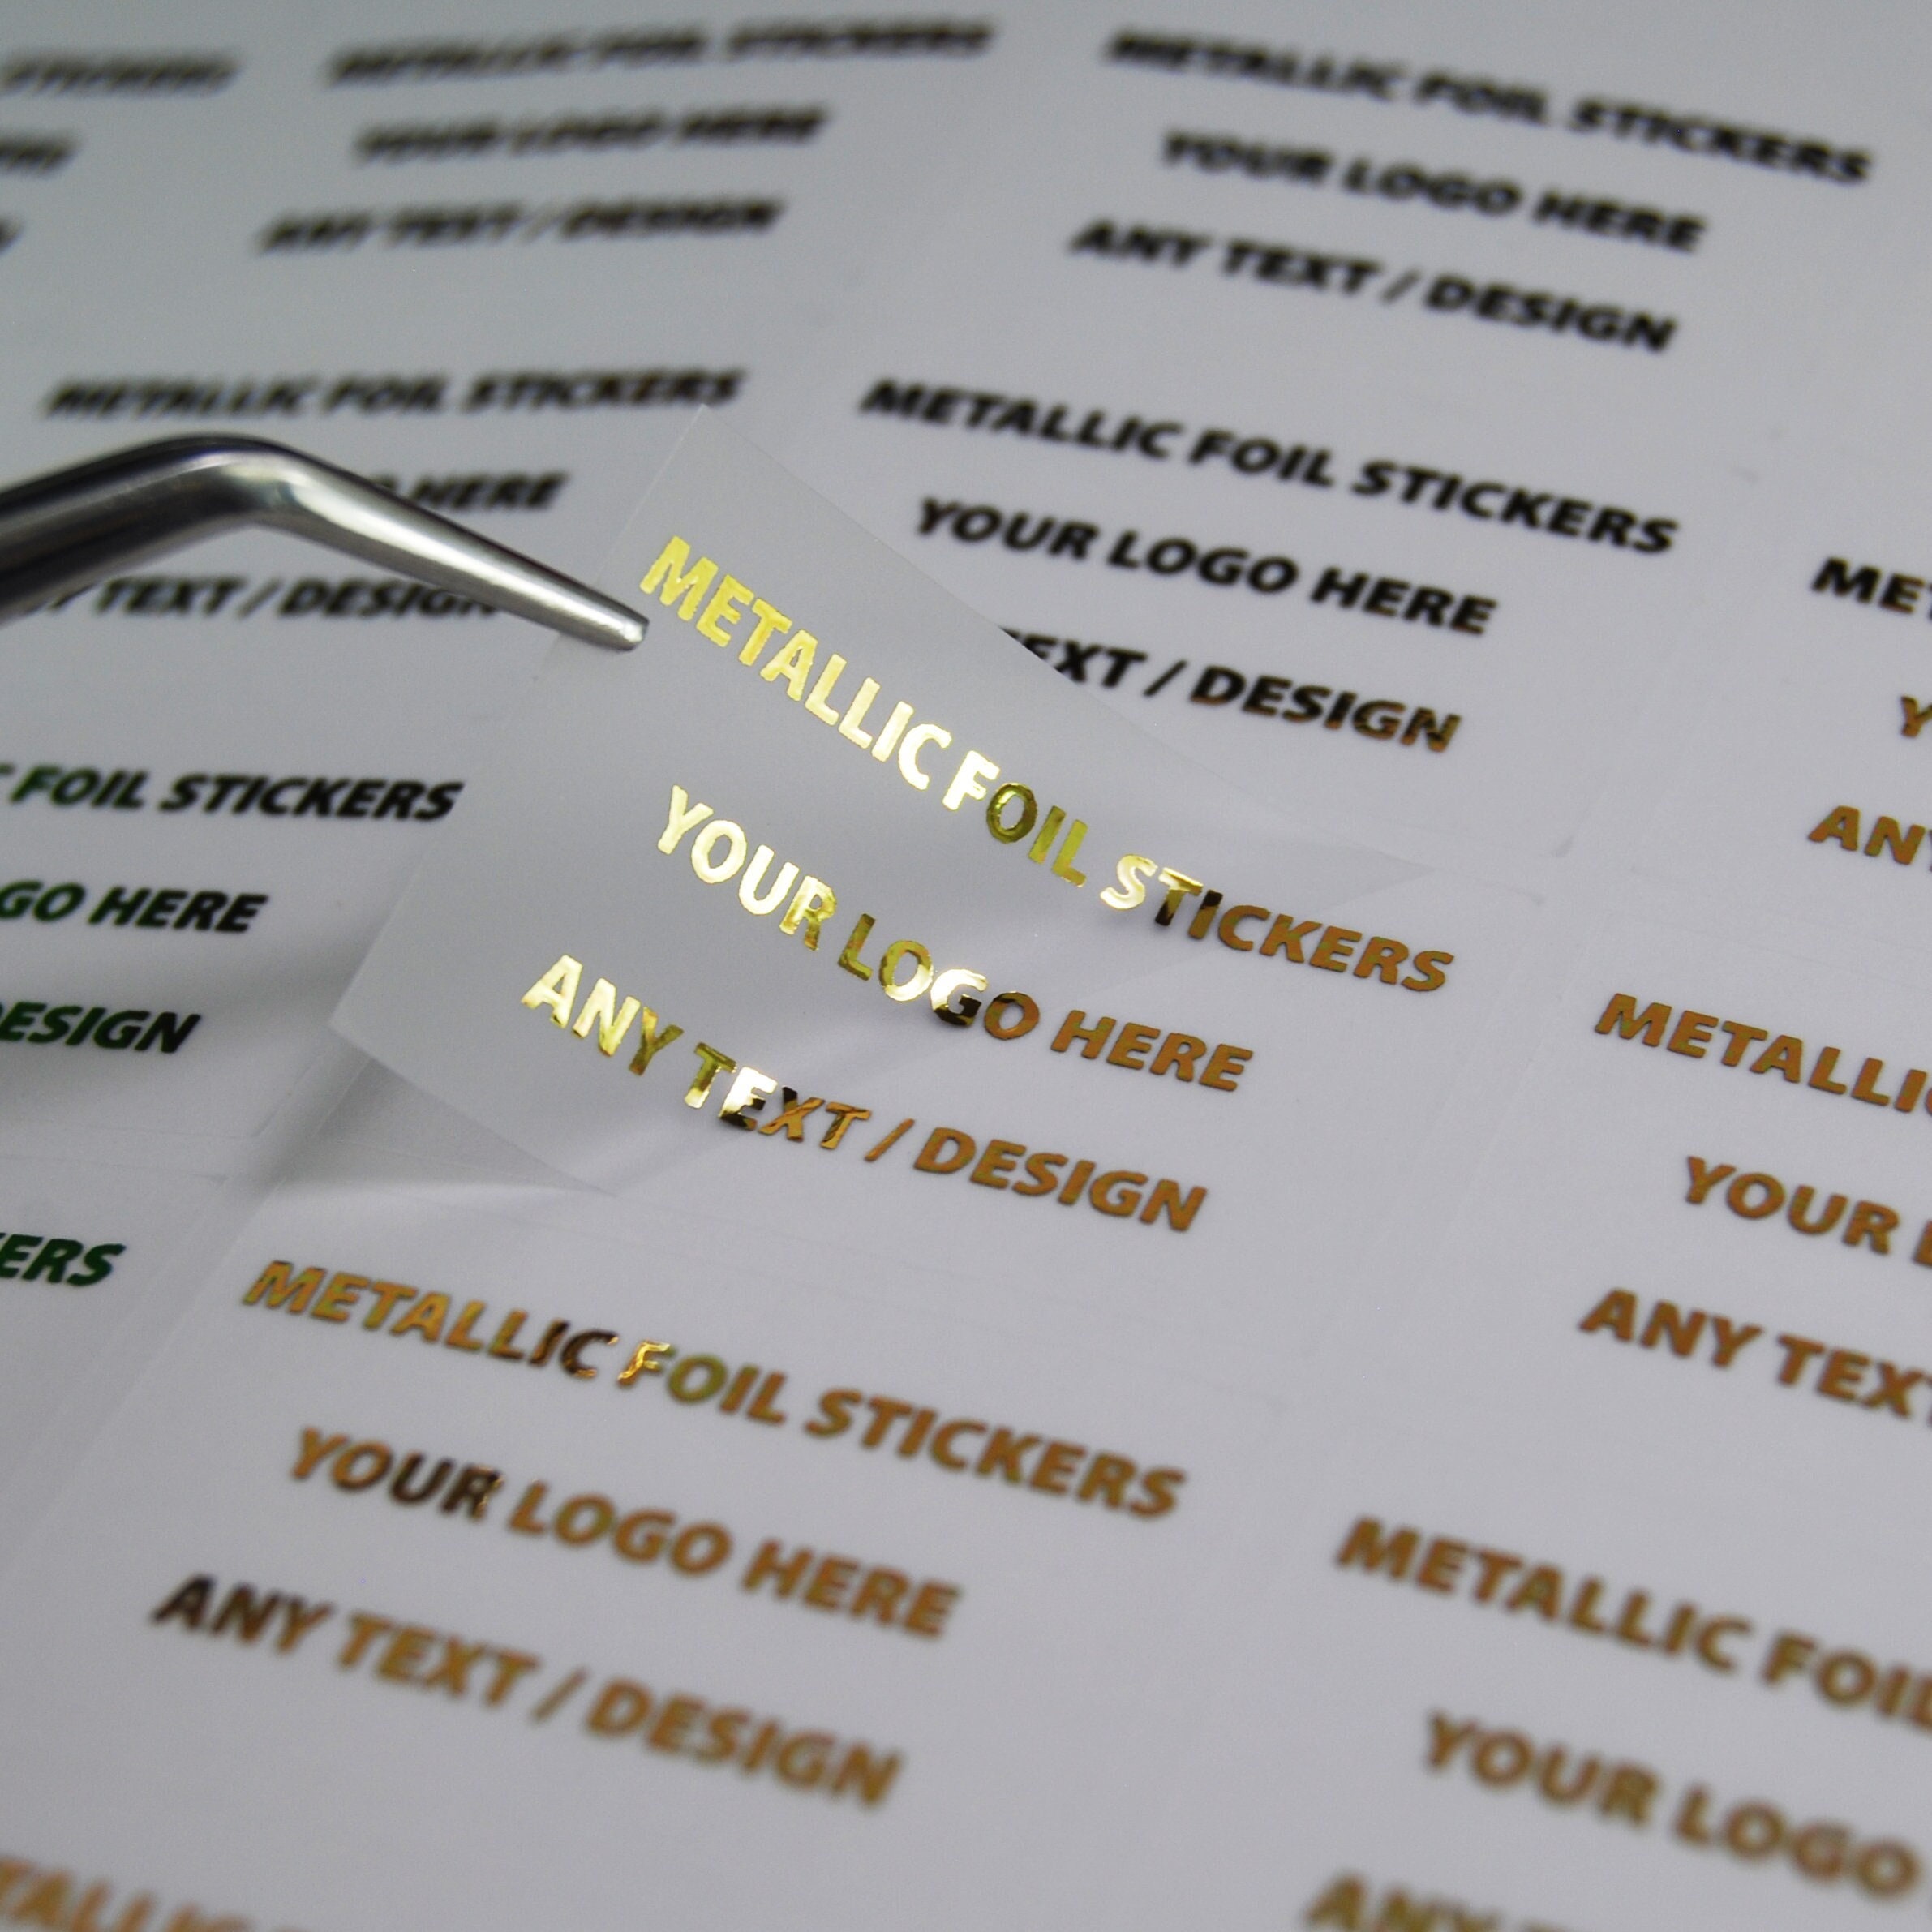 Gold Star Stickers metallic gold foil star labels 45mm STARS Packet of 100